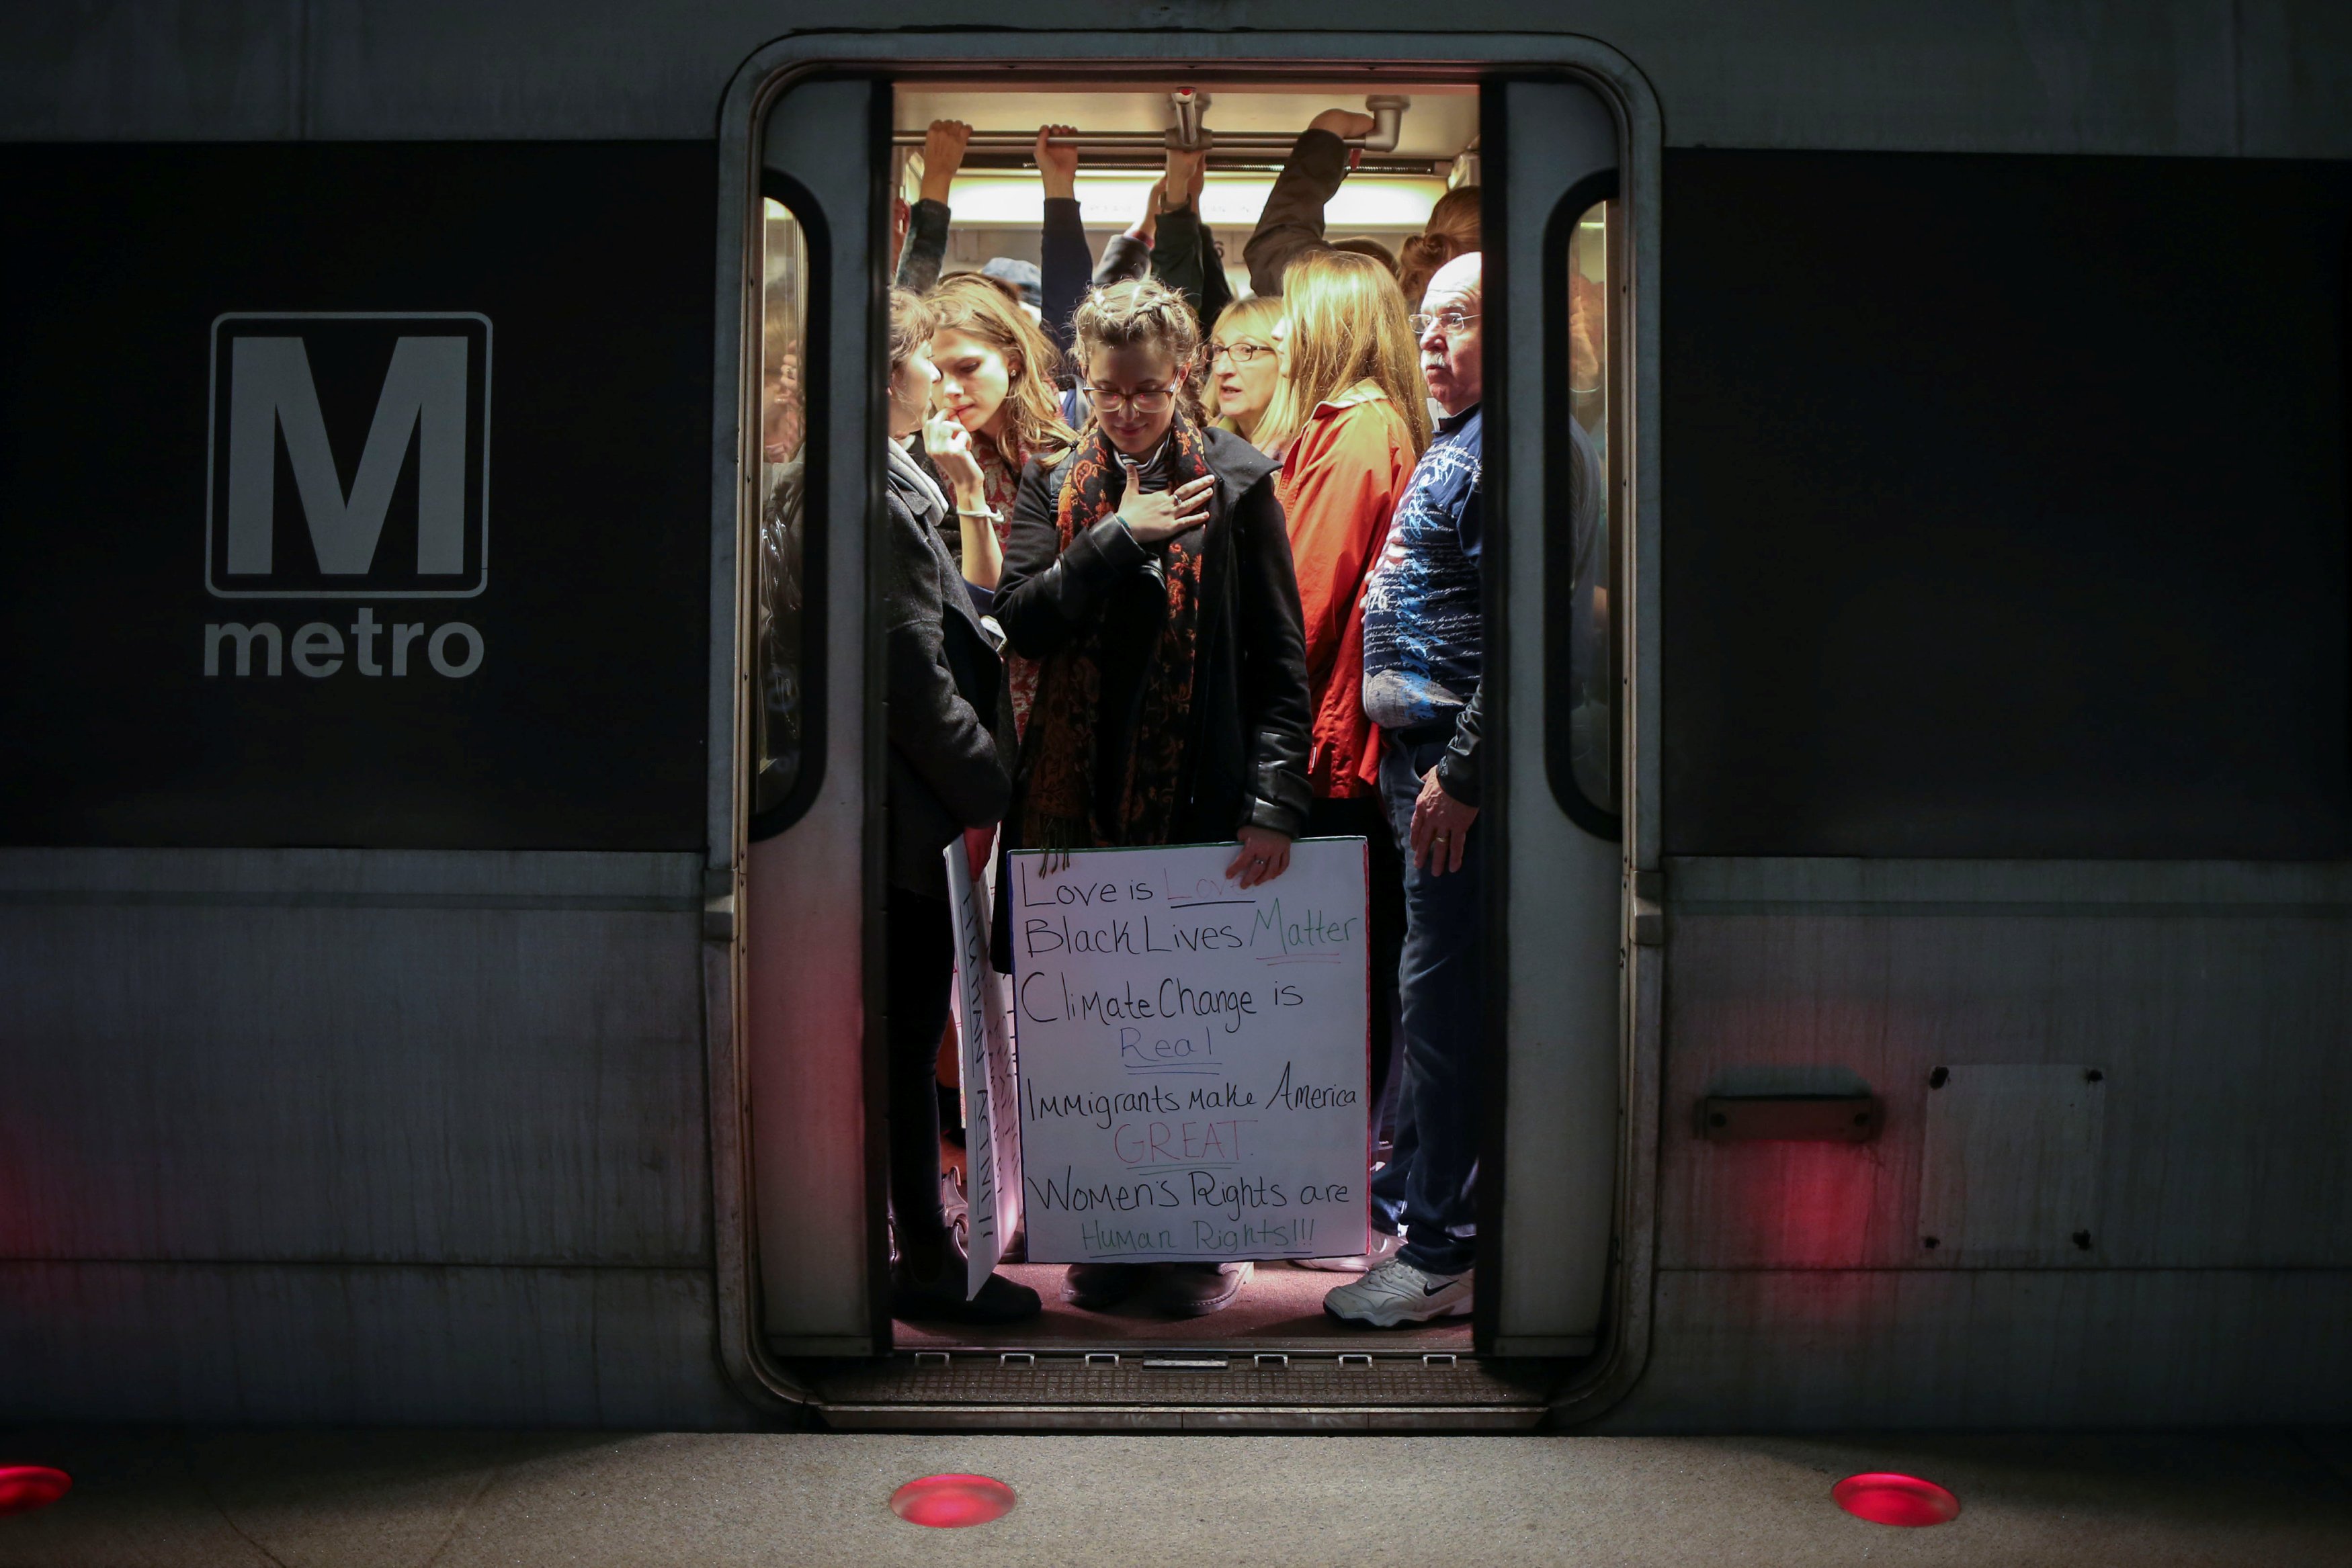 A woman activist holding a placard is seen on a Metrorail as they make their way to the Women's March in Washington, DC, on Jan. 21, 2017.